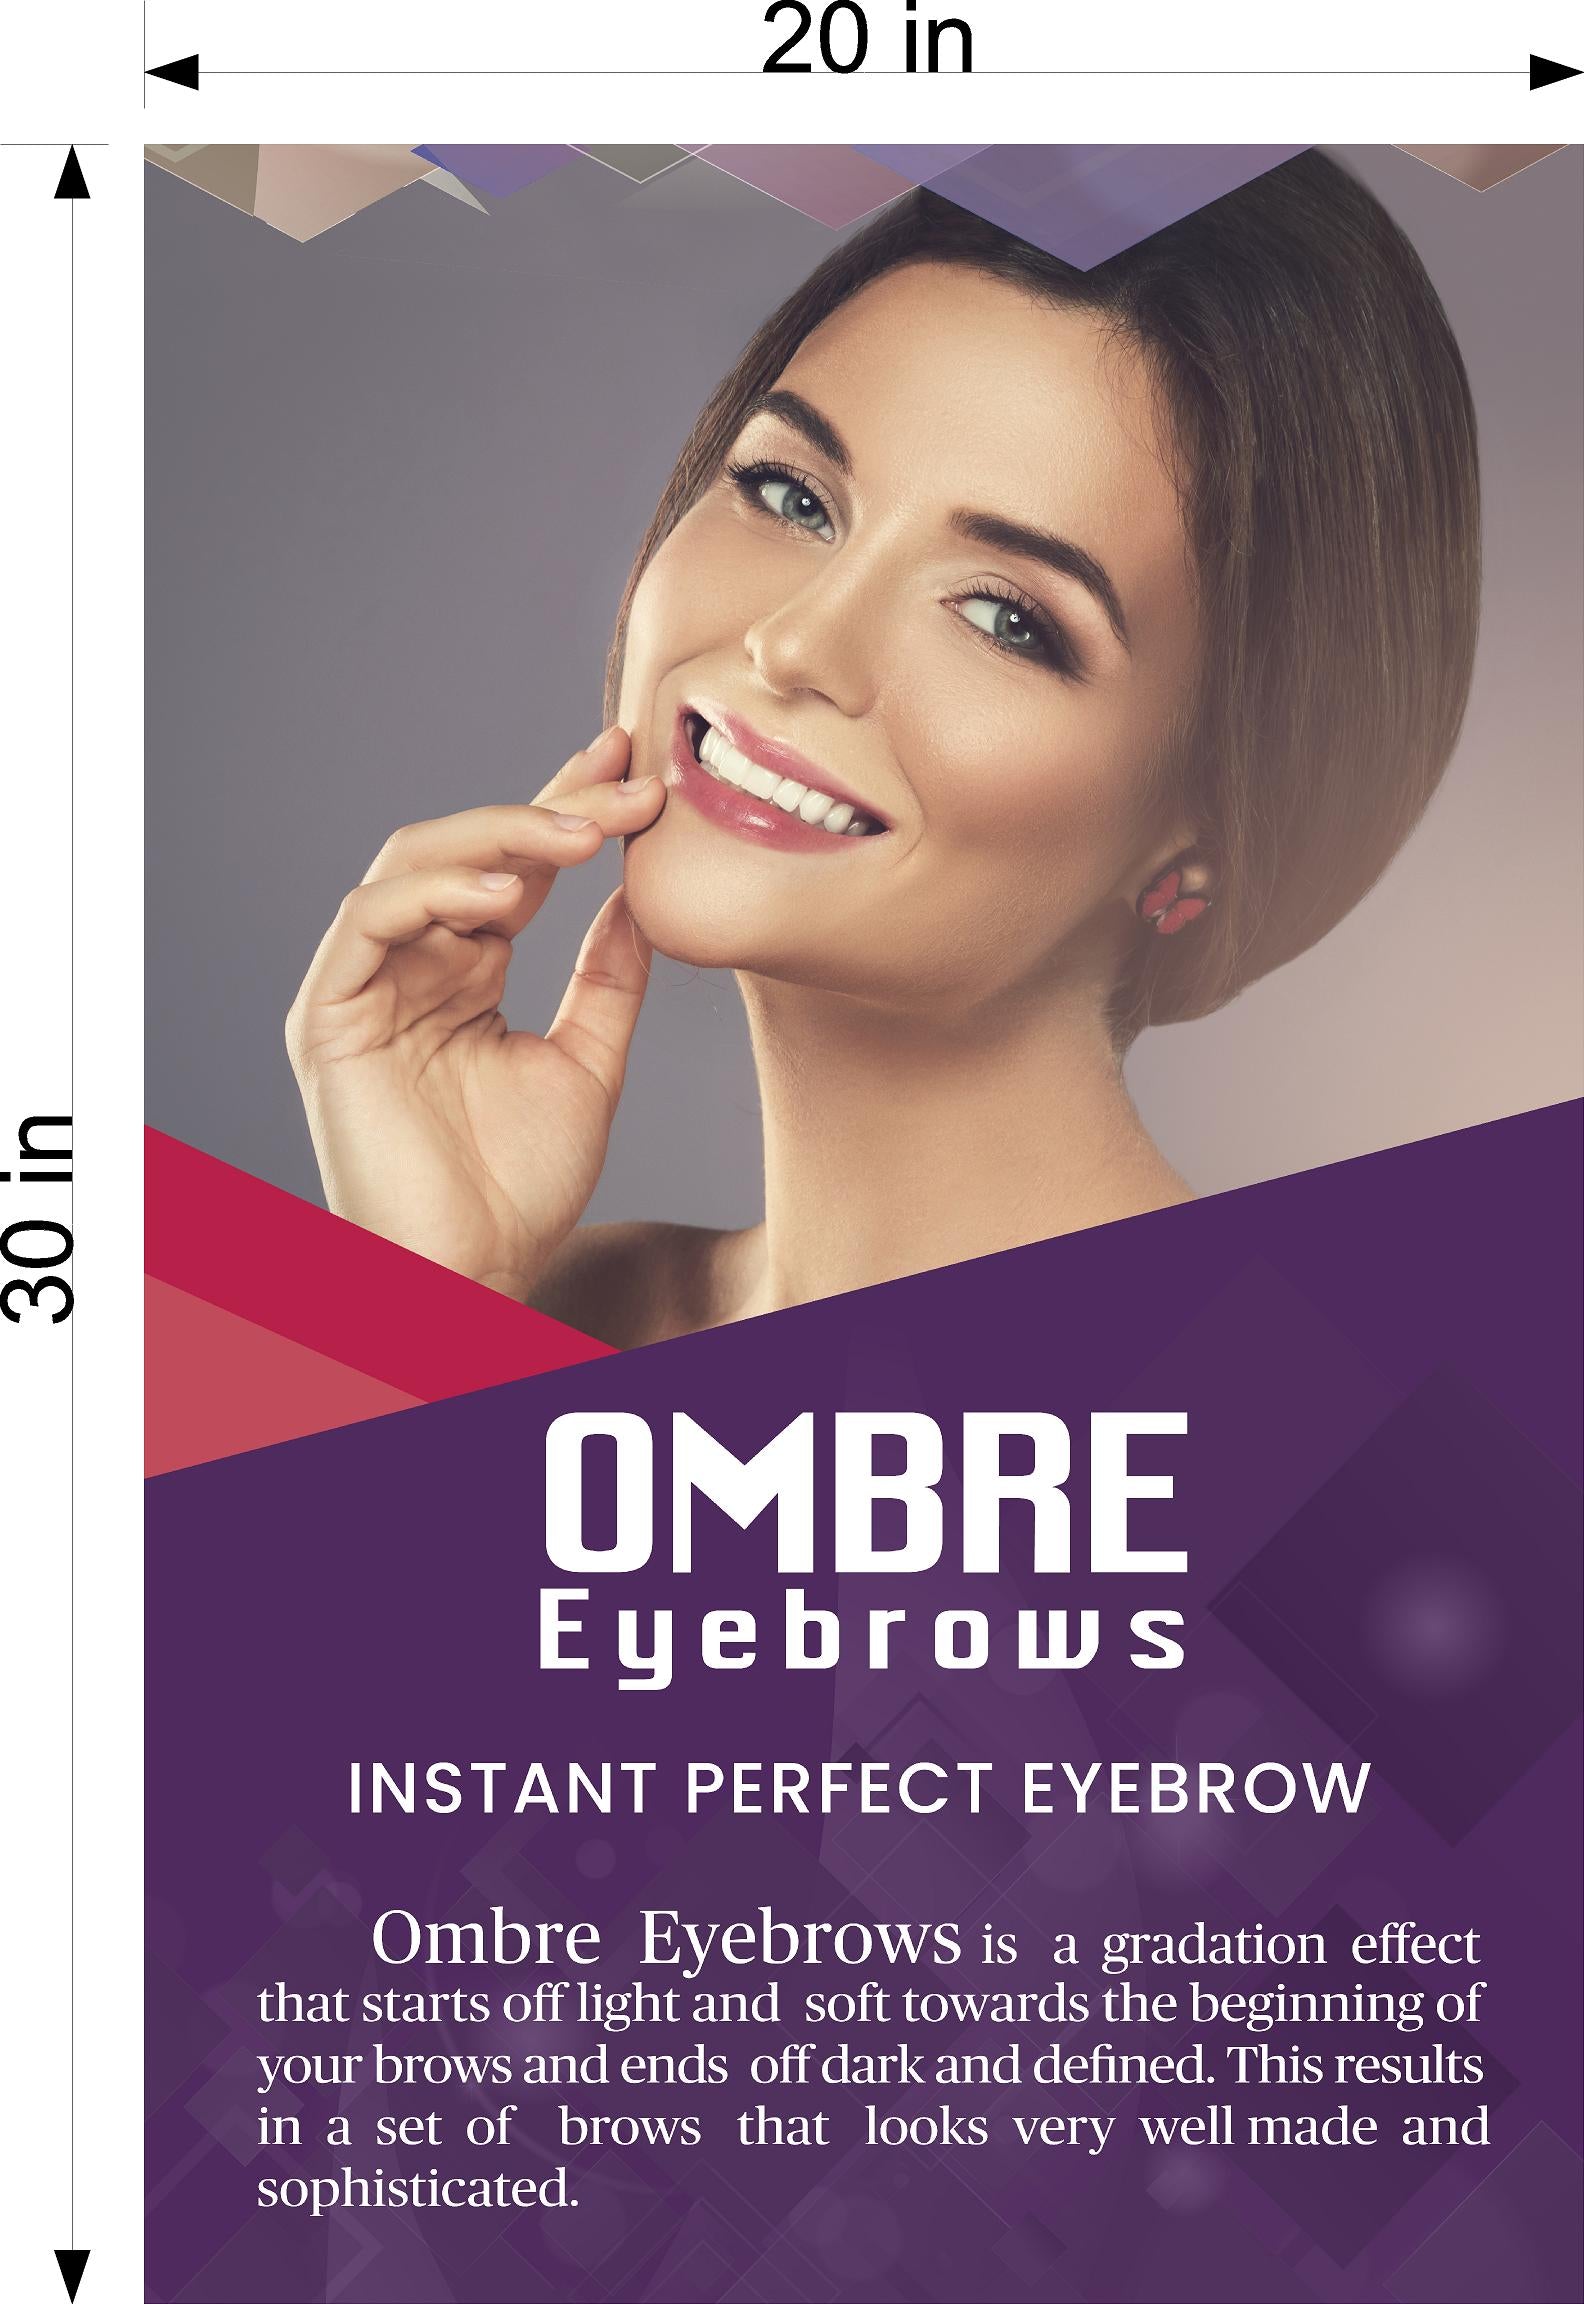 Ombre Eyebrows 04 Photo-Realistic Paper Poster Premium Interior Inside Sign Advertising Marketing Wall Window Non-Laminated Vertical